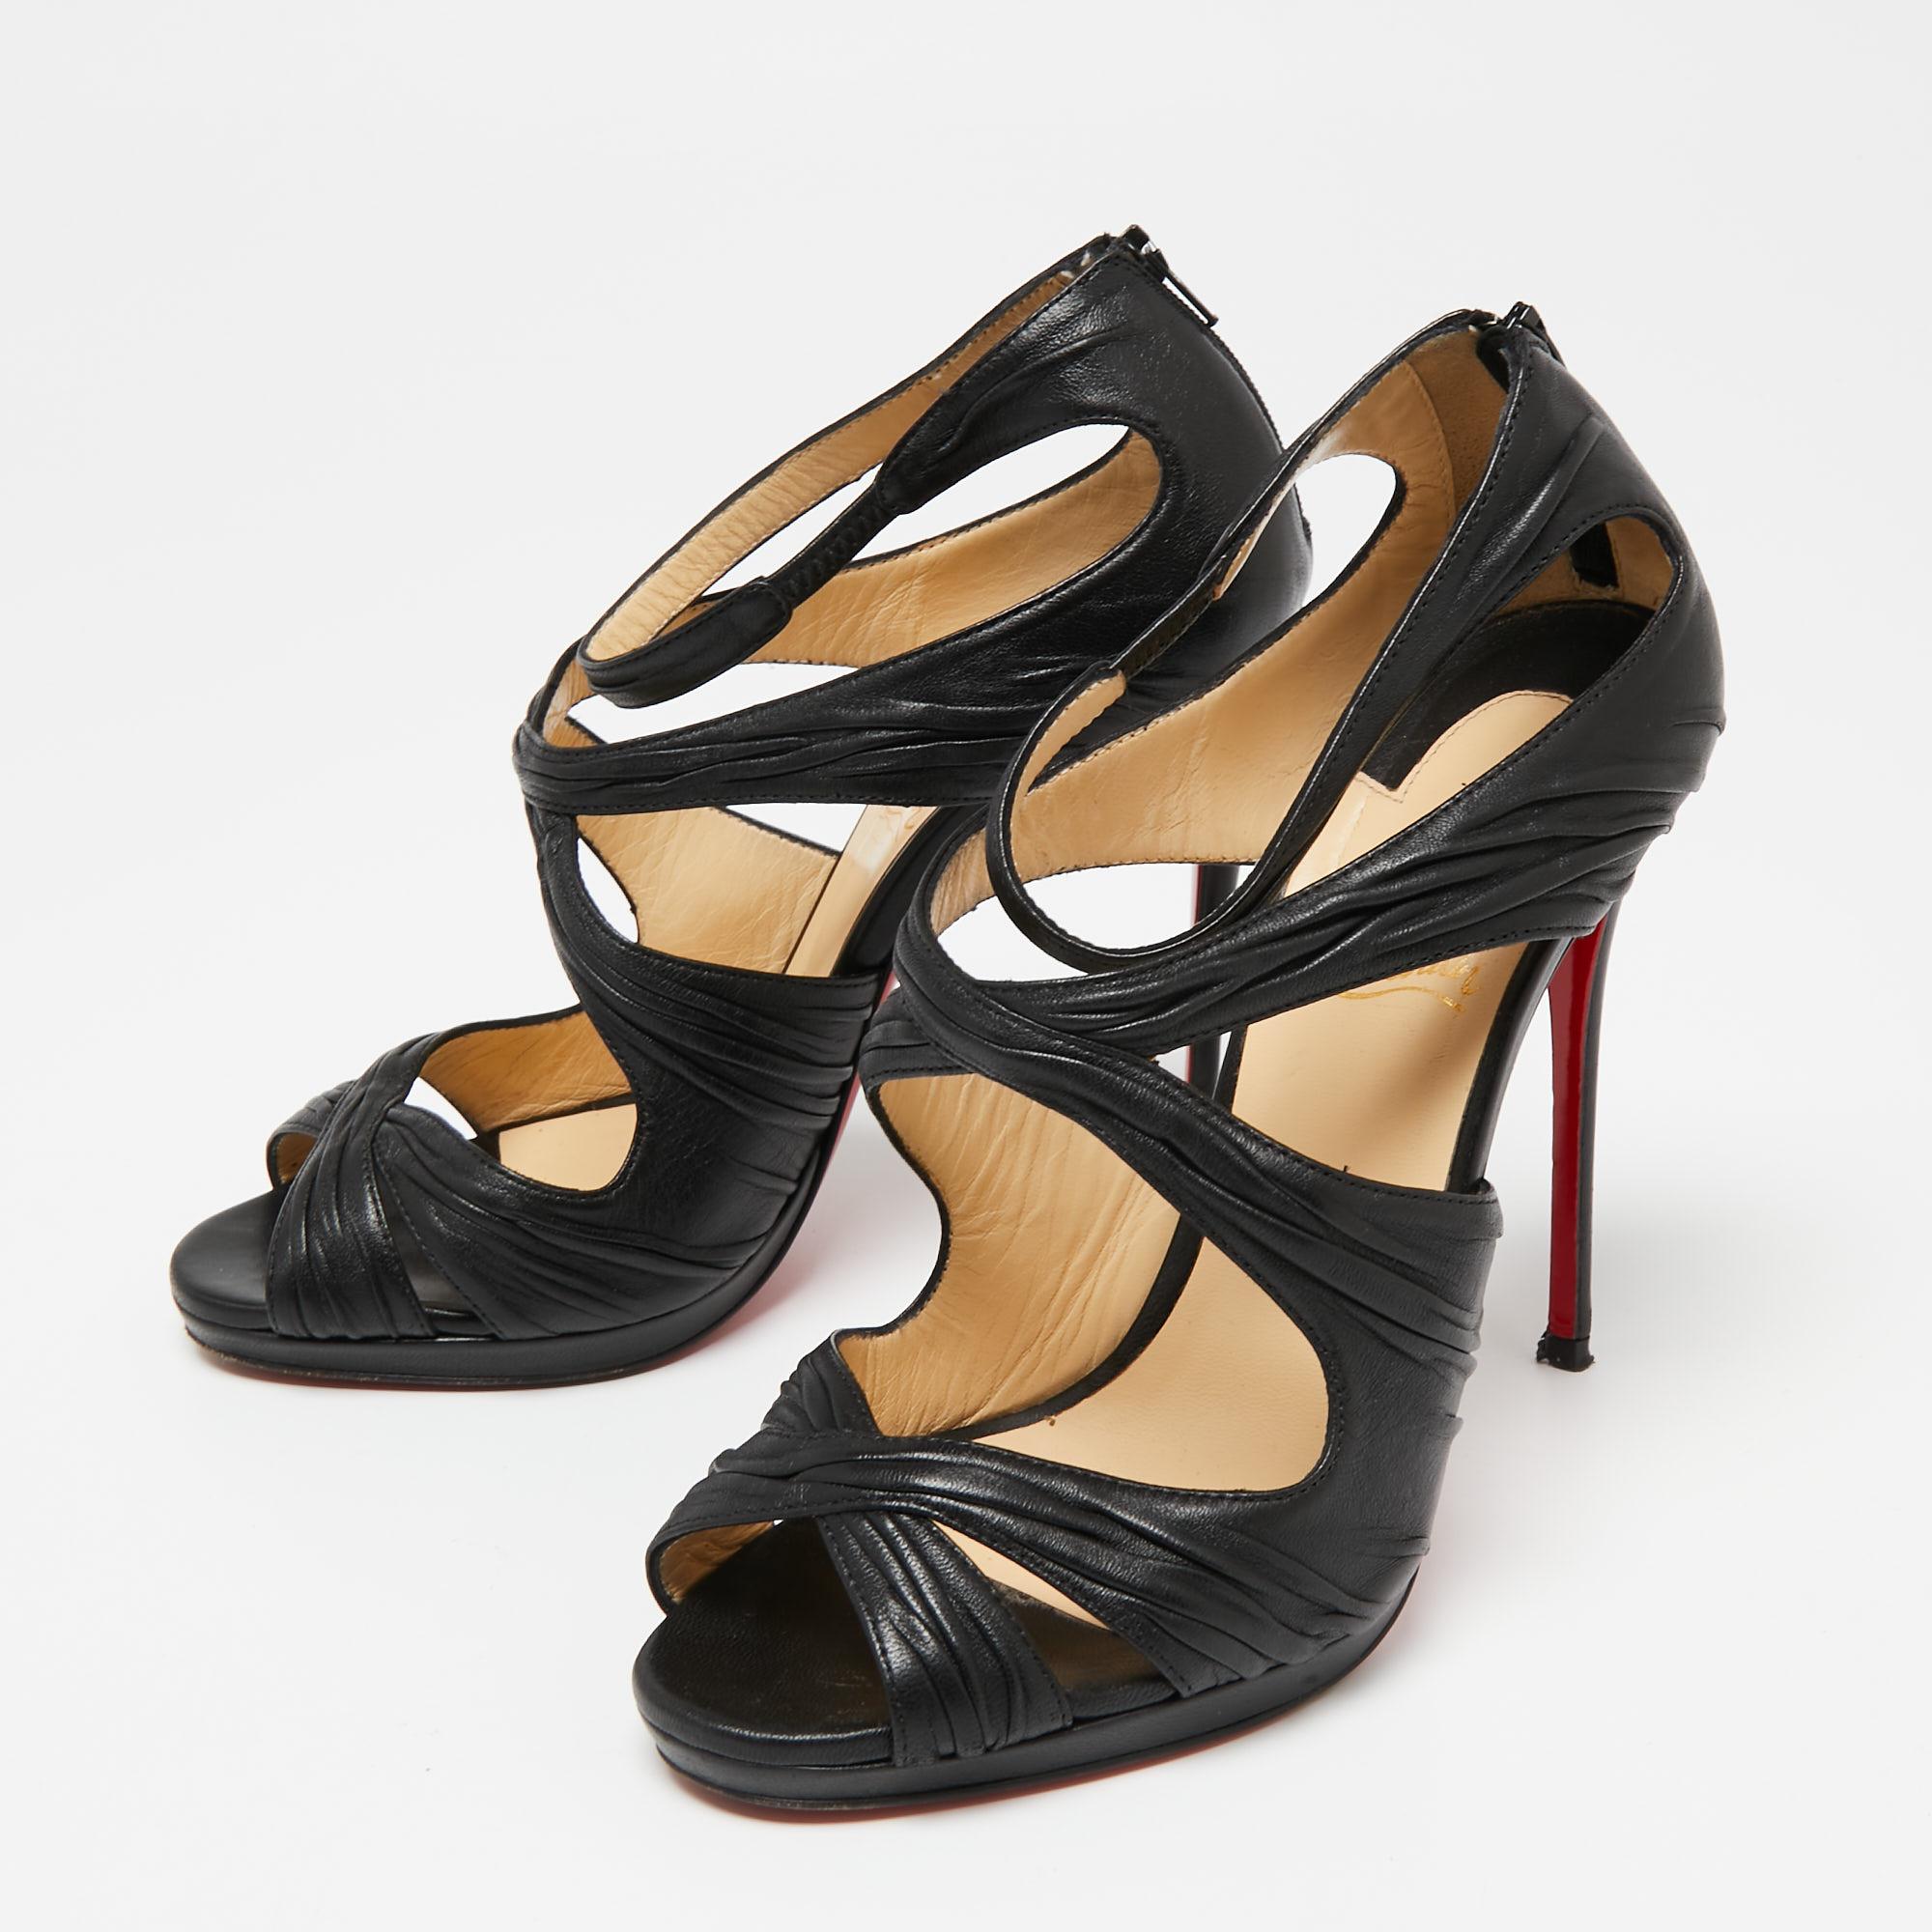 One of the most celebrated fashion House, Christian Louboutin is known for its brilliant craftsmanship in shoemaking. Crafted from quality materials in a black shade, the strappy style will adorn your feet in the most beautiful way. Style them with